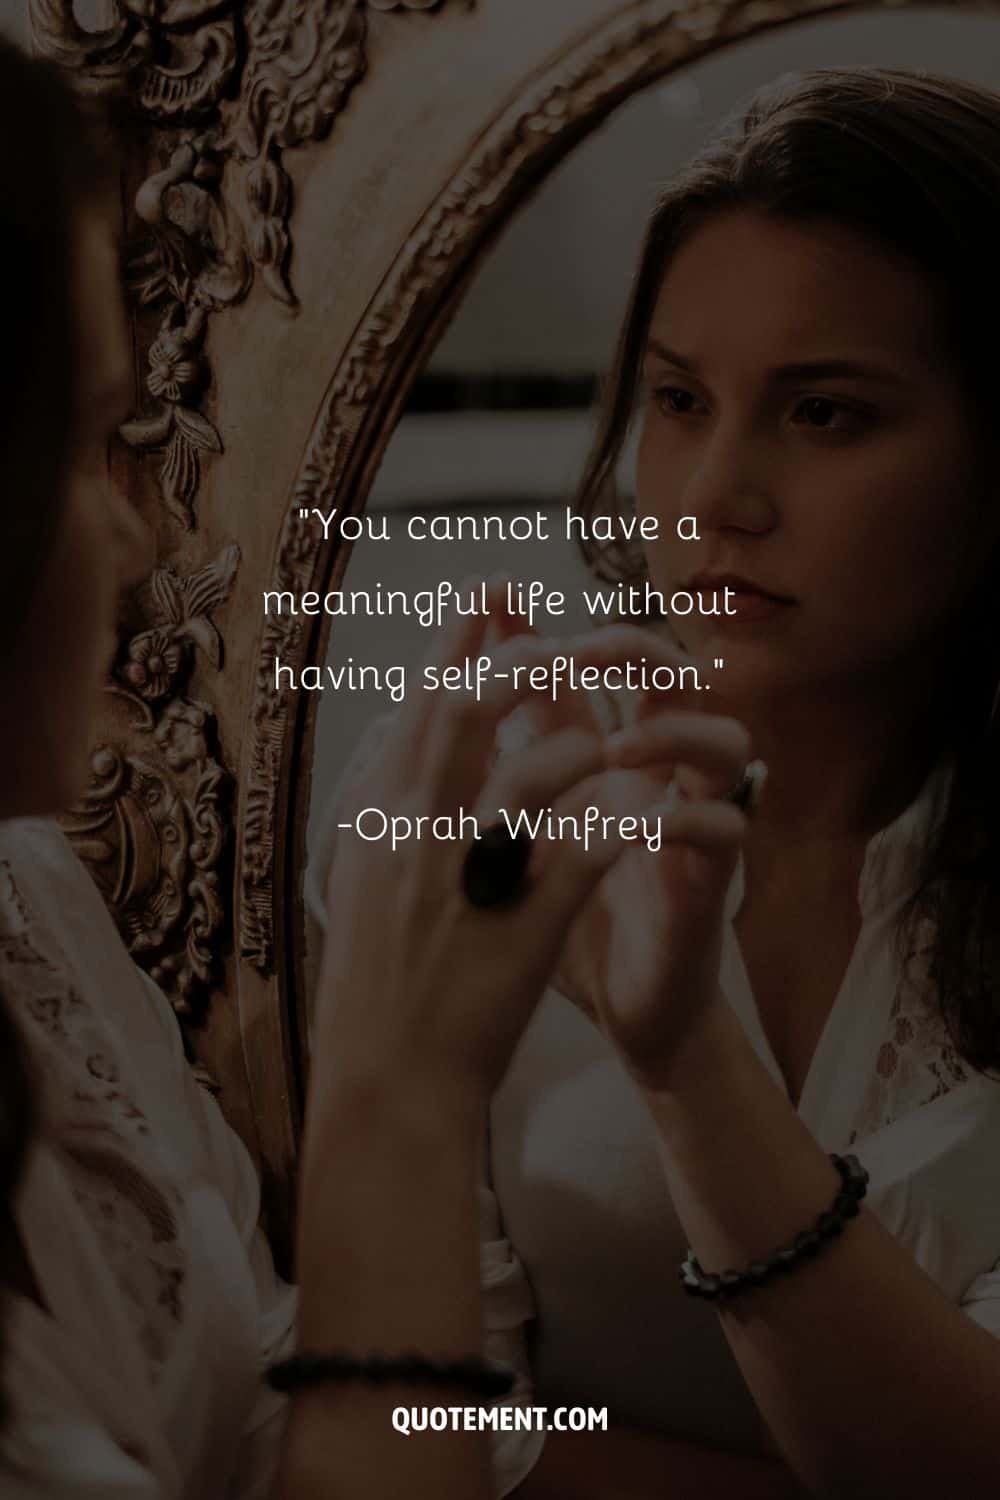 You cannot have a meaningful life without having self-reflection. – Oprah Winfrey